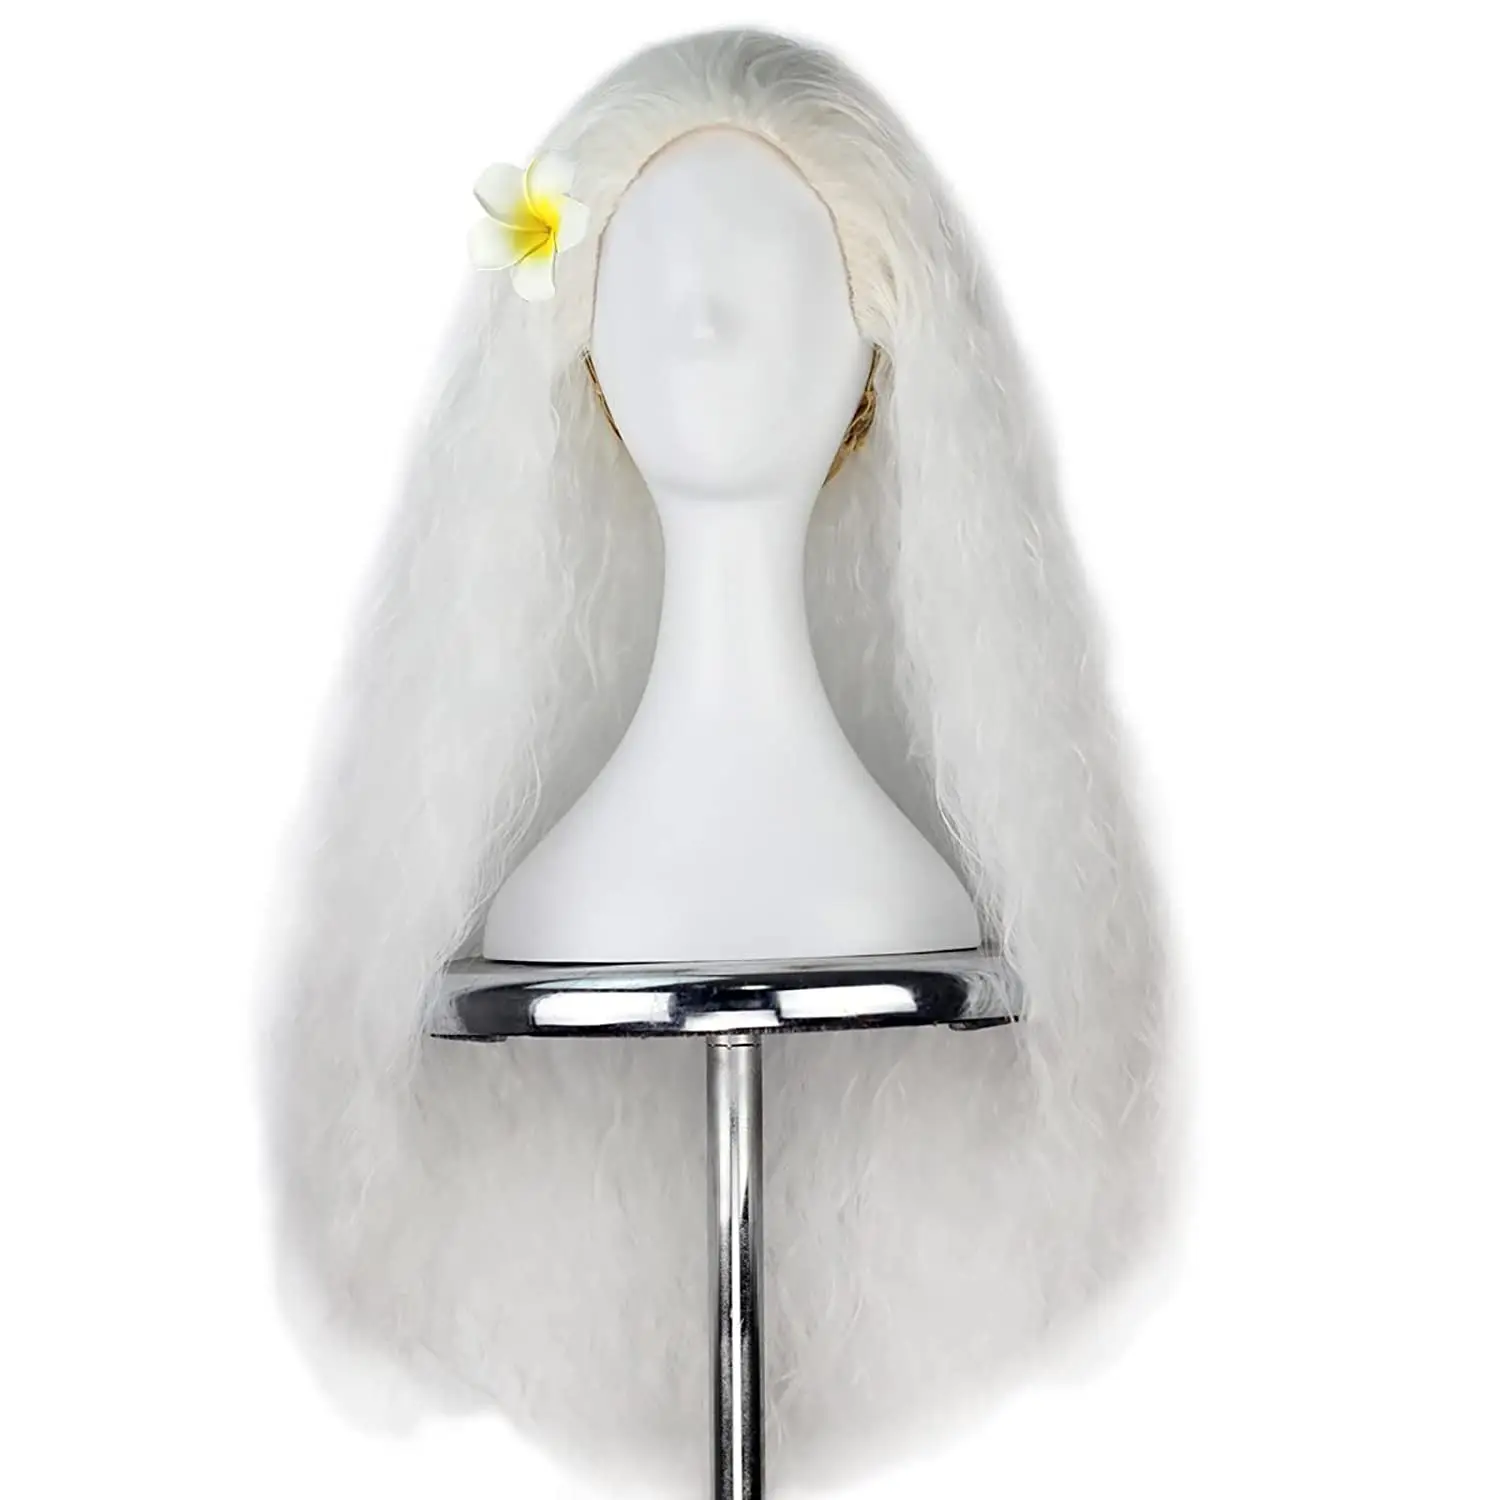 Old Lady Long Wavy Wig Synthetic Natural Frizzy White Hair Wig Granny Movie Princess Cosplay Costume Halloween  Daily Girls Wig